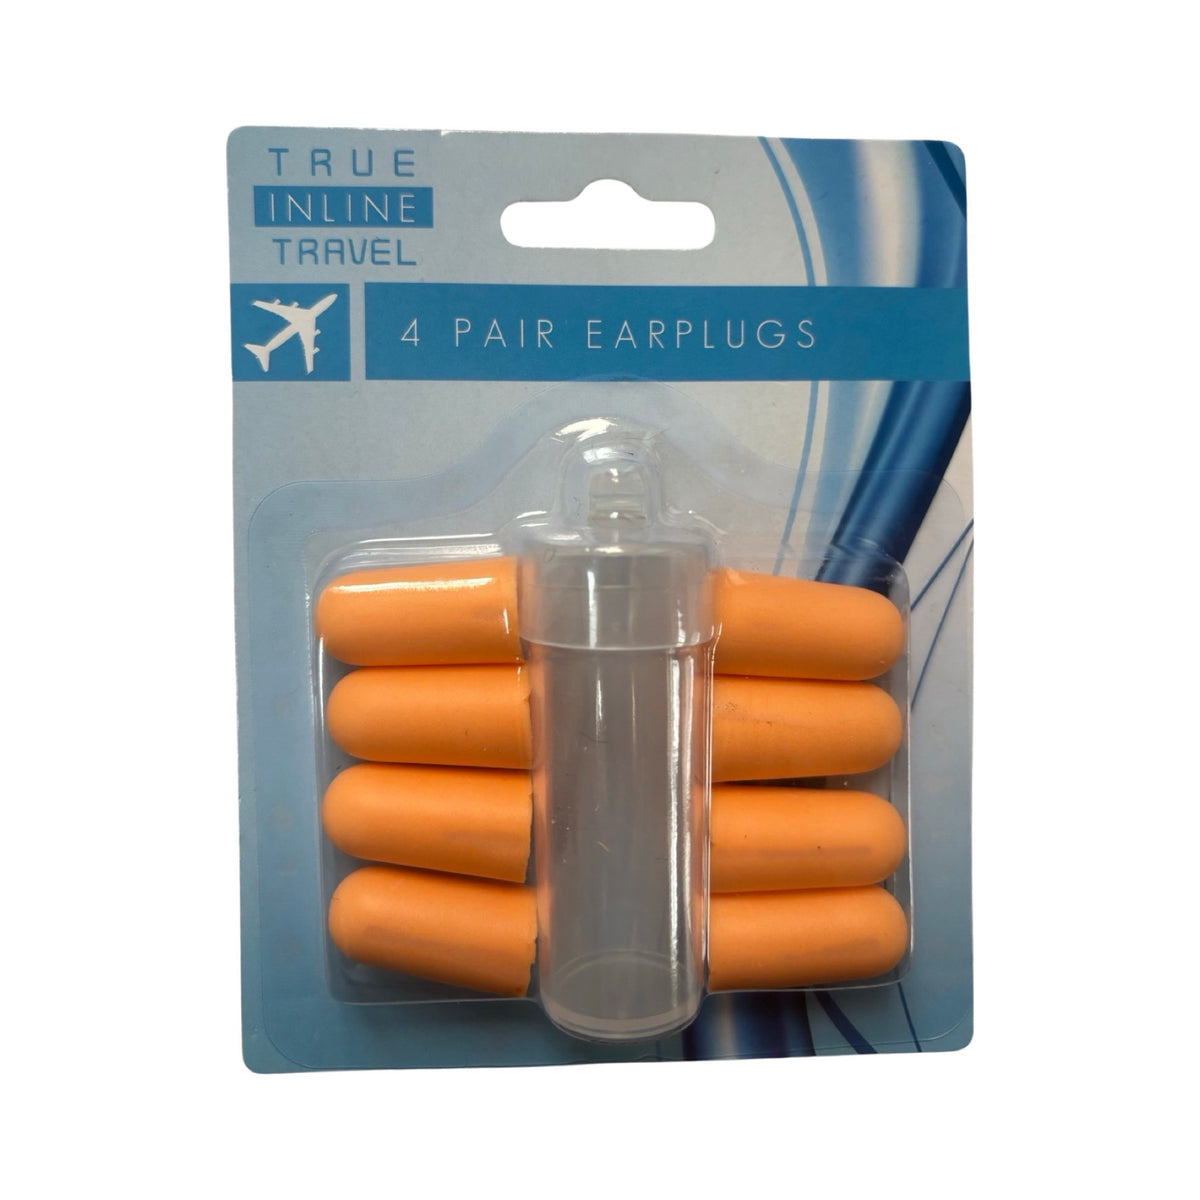 4 Sets of Earplugs With Case/ Attach to Keys or Wear on Neck - Block Out Loud Noises